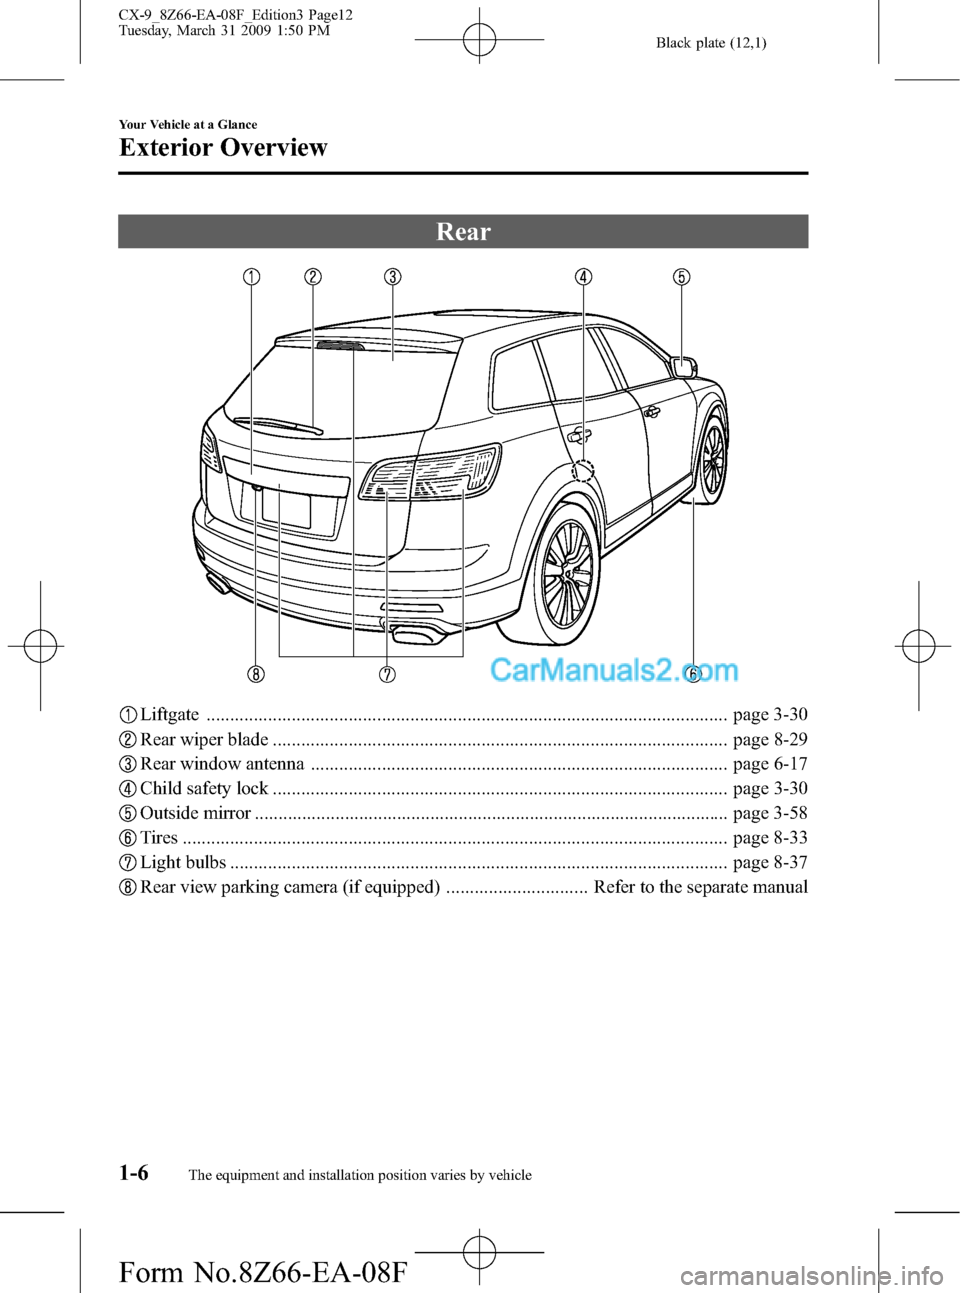 MAZDA MODEL CX-9 2009  Owners Manual (in English) Black plate (12,1)
Rear
Liftgate .............................................................................................................. page 3-30
Rear wiper blade .............................